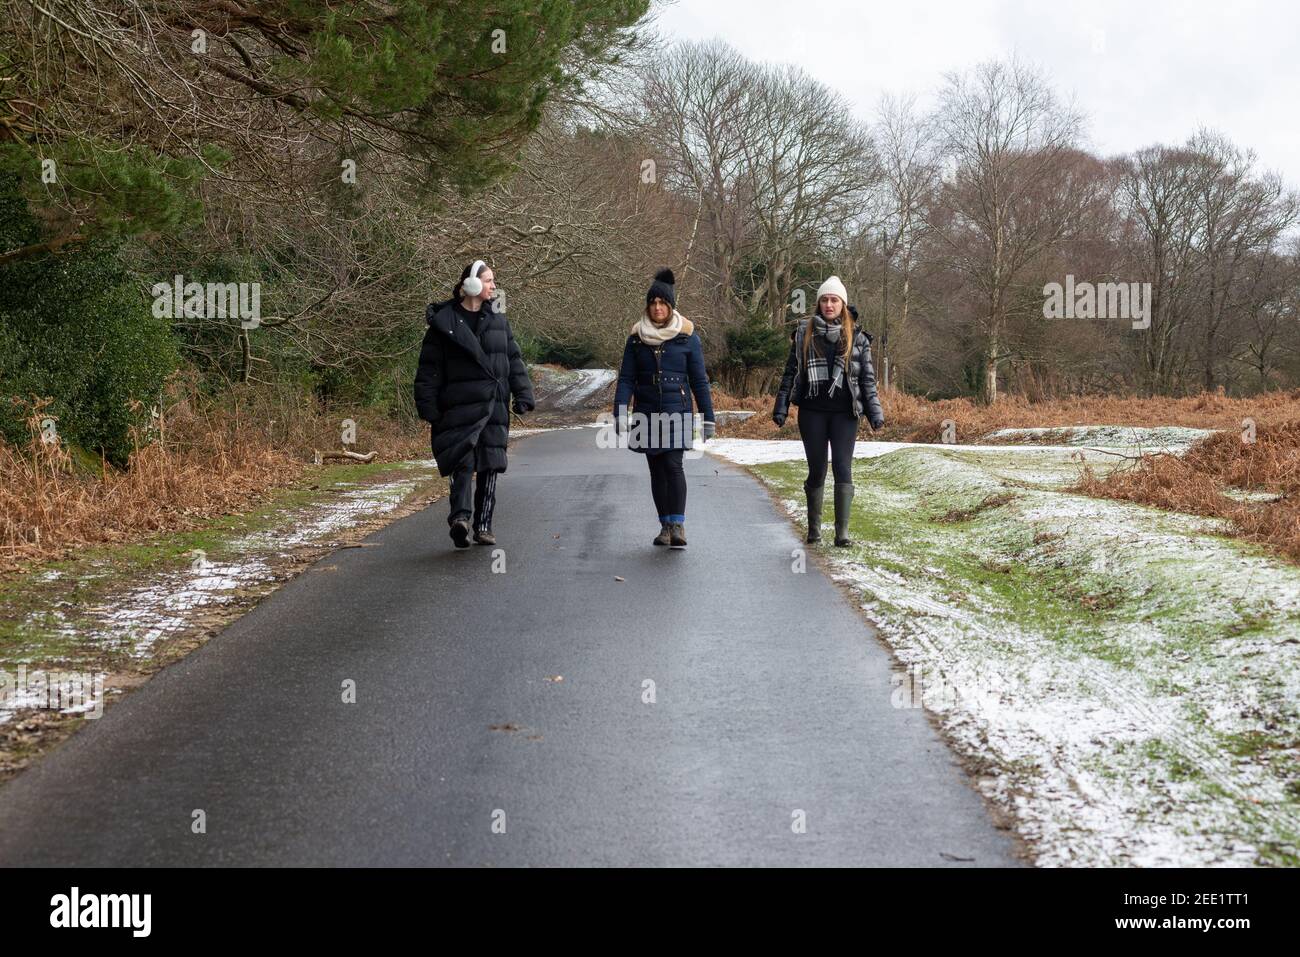 Three people walking down a country road with woolly hats and ear muffs in winter with snow Stock Photo